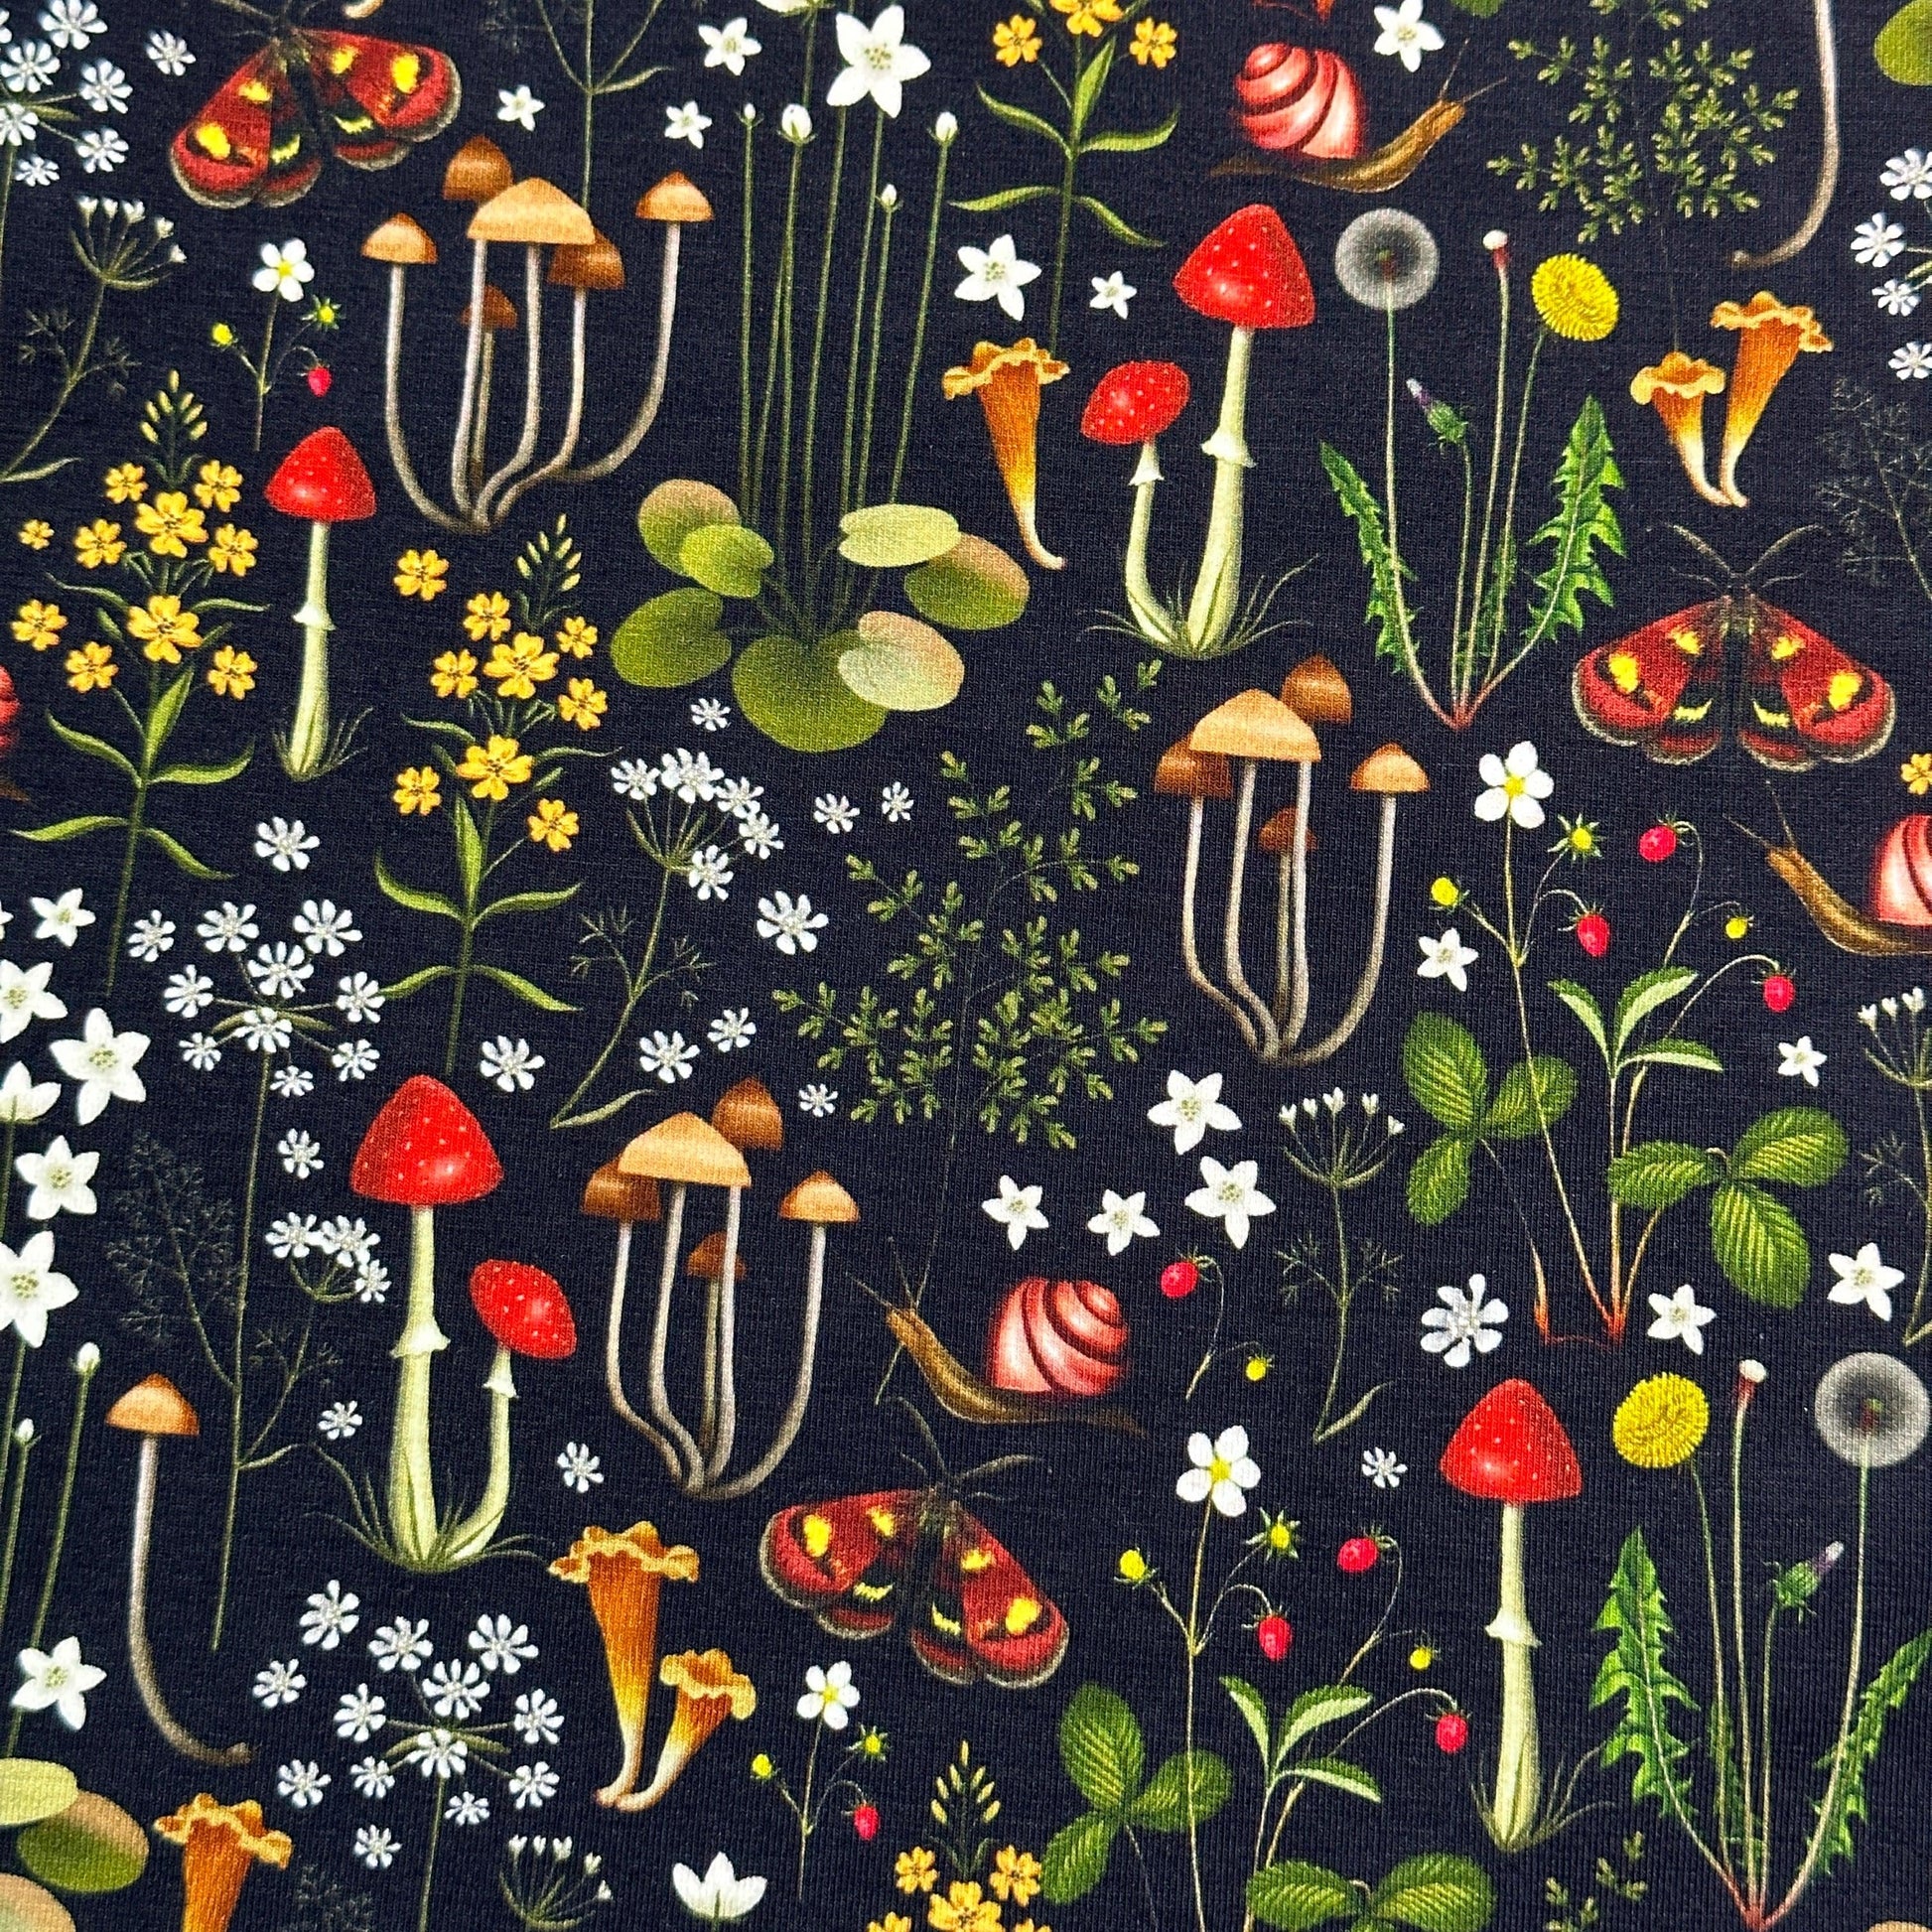 Forest Floral on Black Organic Cotton/Spandex Jersey Fabric - Nature's Fabrics